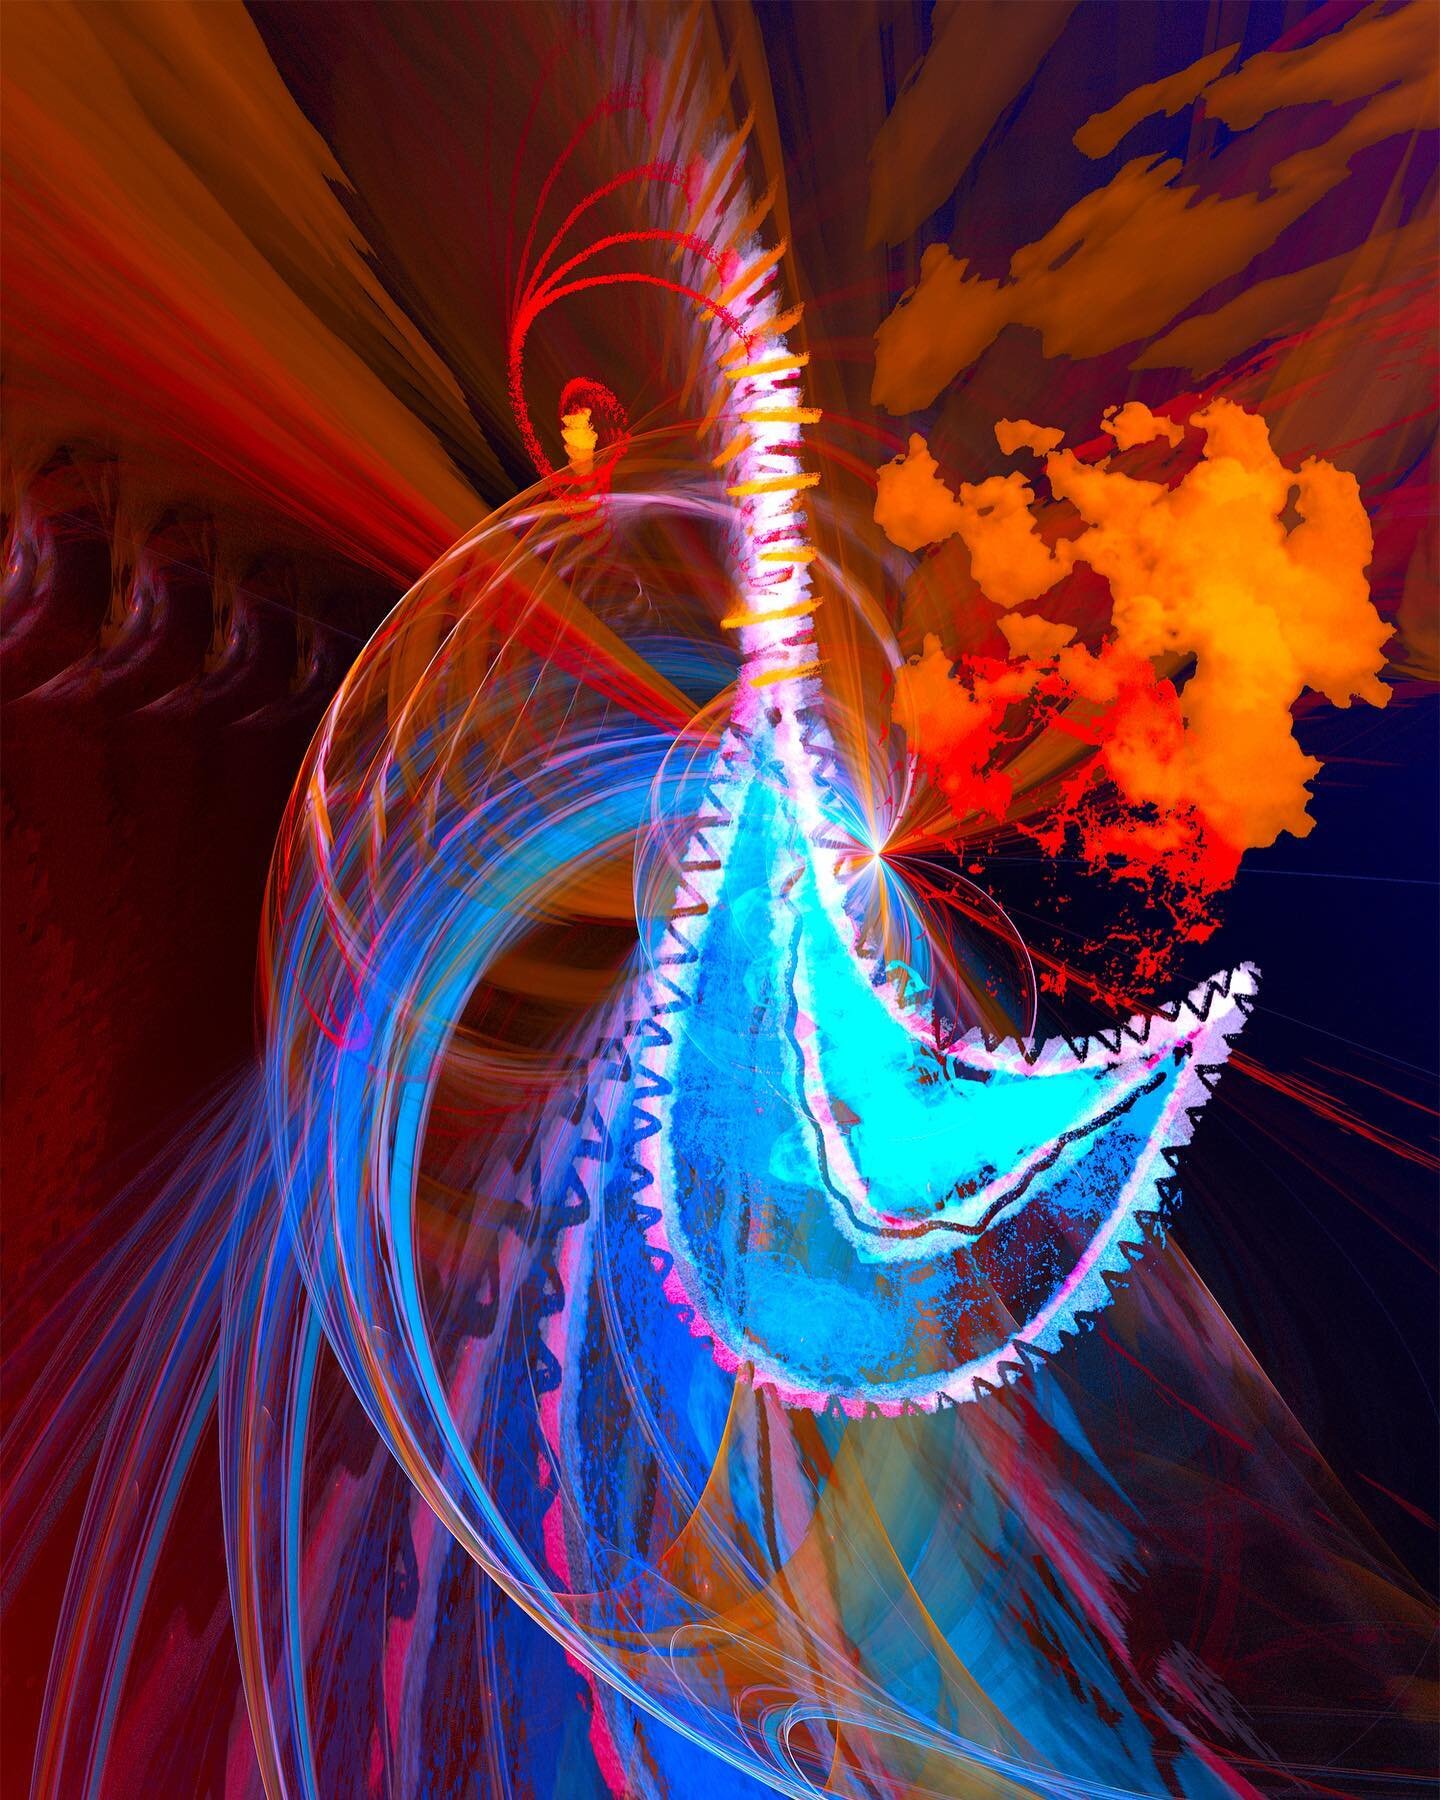 &quot;Phoenix&quot; 
#Digital #painting source created first, then manipulated with #fractal algorithms. #artworks #abstract #abstractart

#Print available. Follow linktr.ee/skiphunt in bio to [Order Skip Hunt Prints] &copy; 2019 Skip Hunt